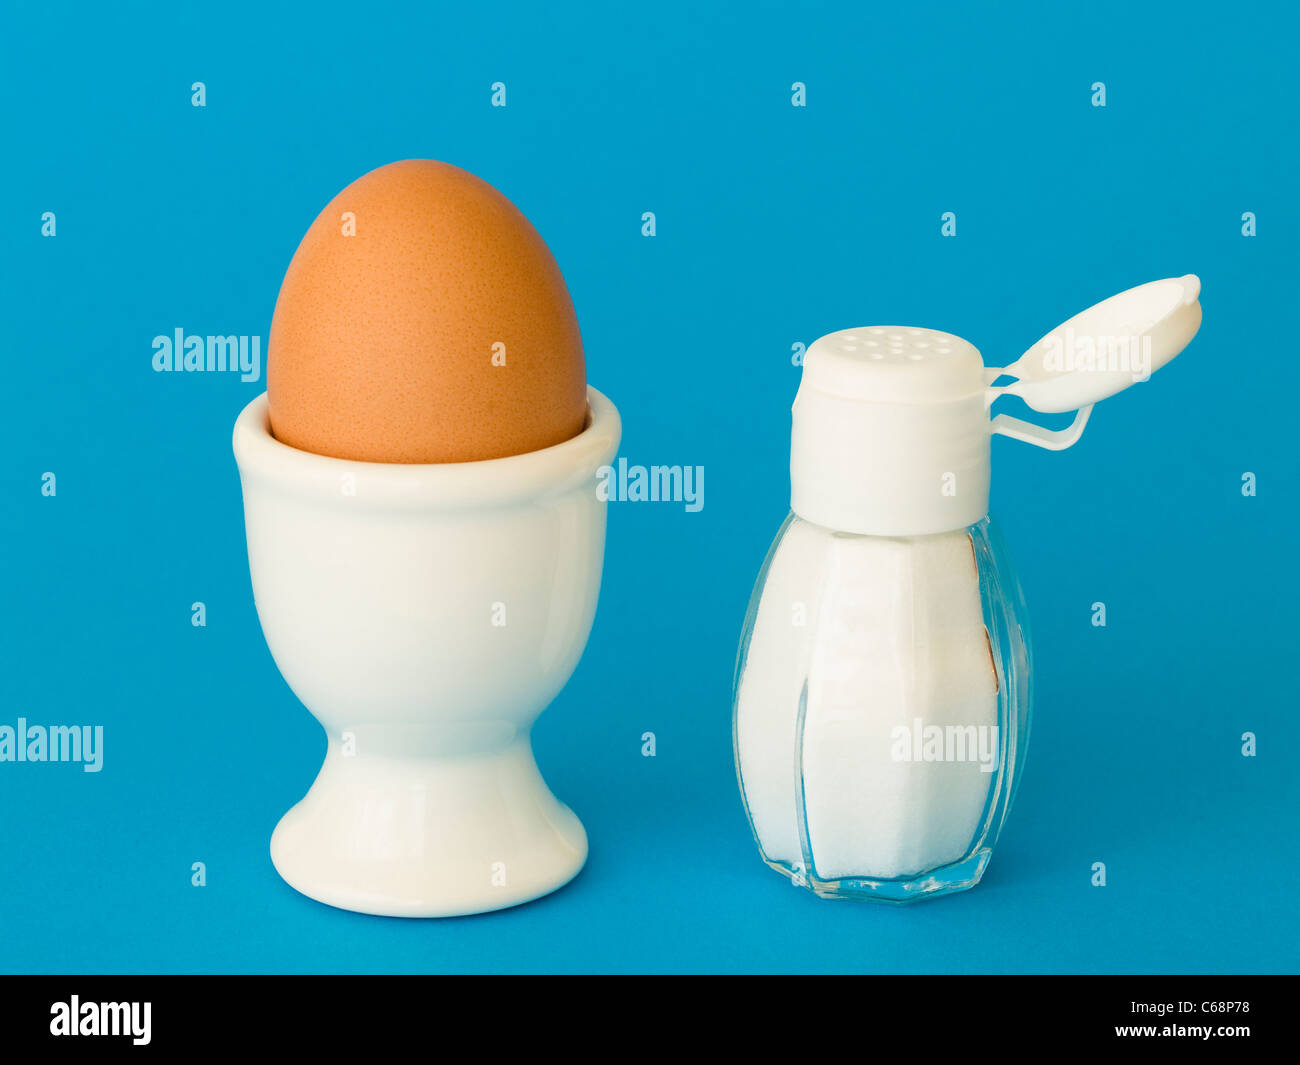 one eggcup with a brown hen's egg, beside is a saltcellar Stock Photo